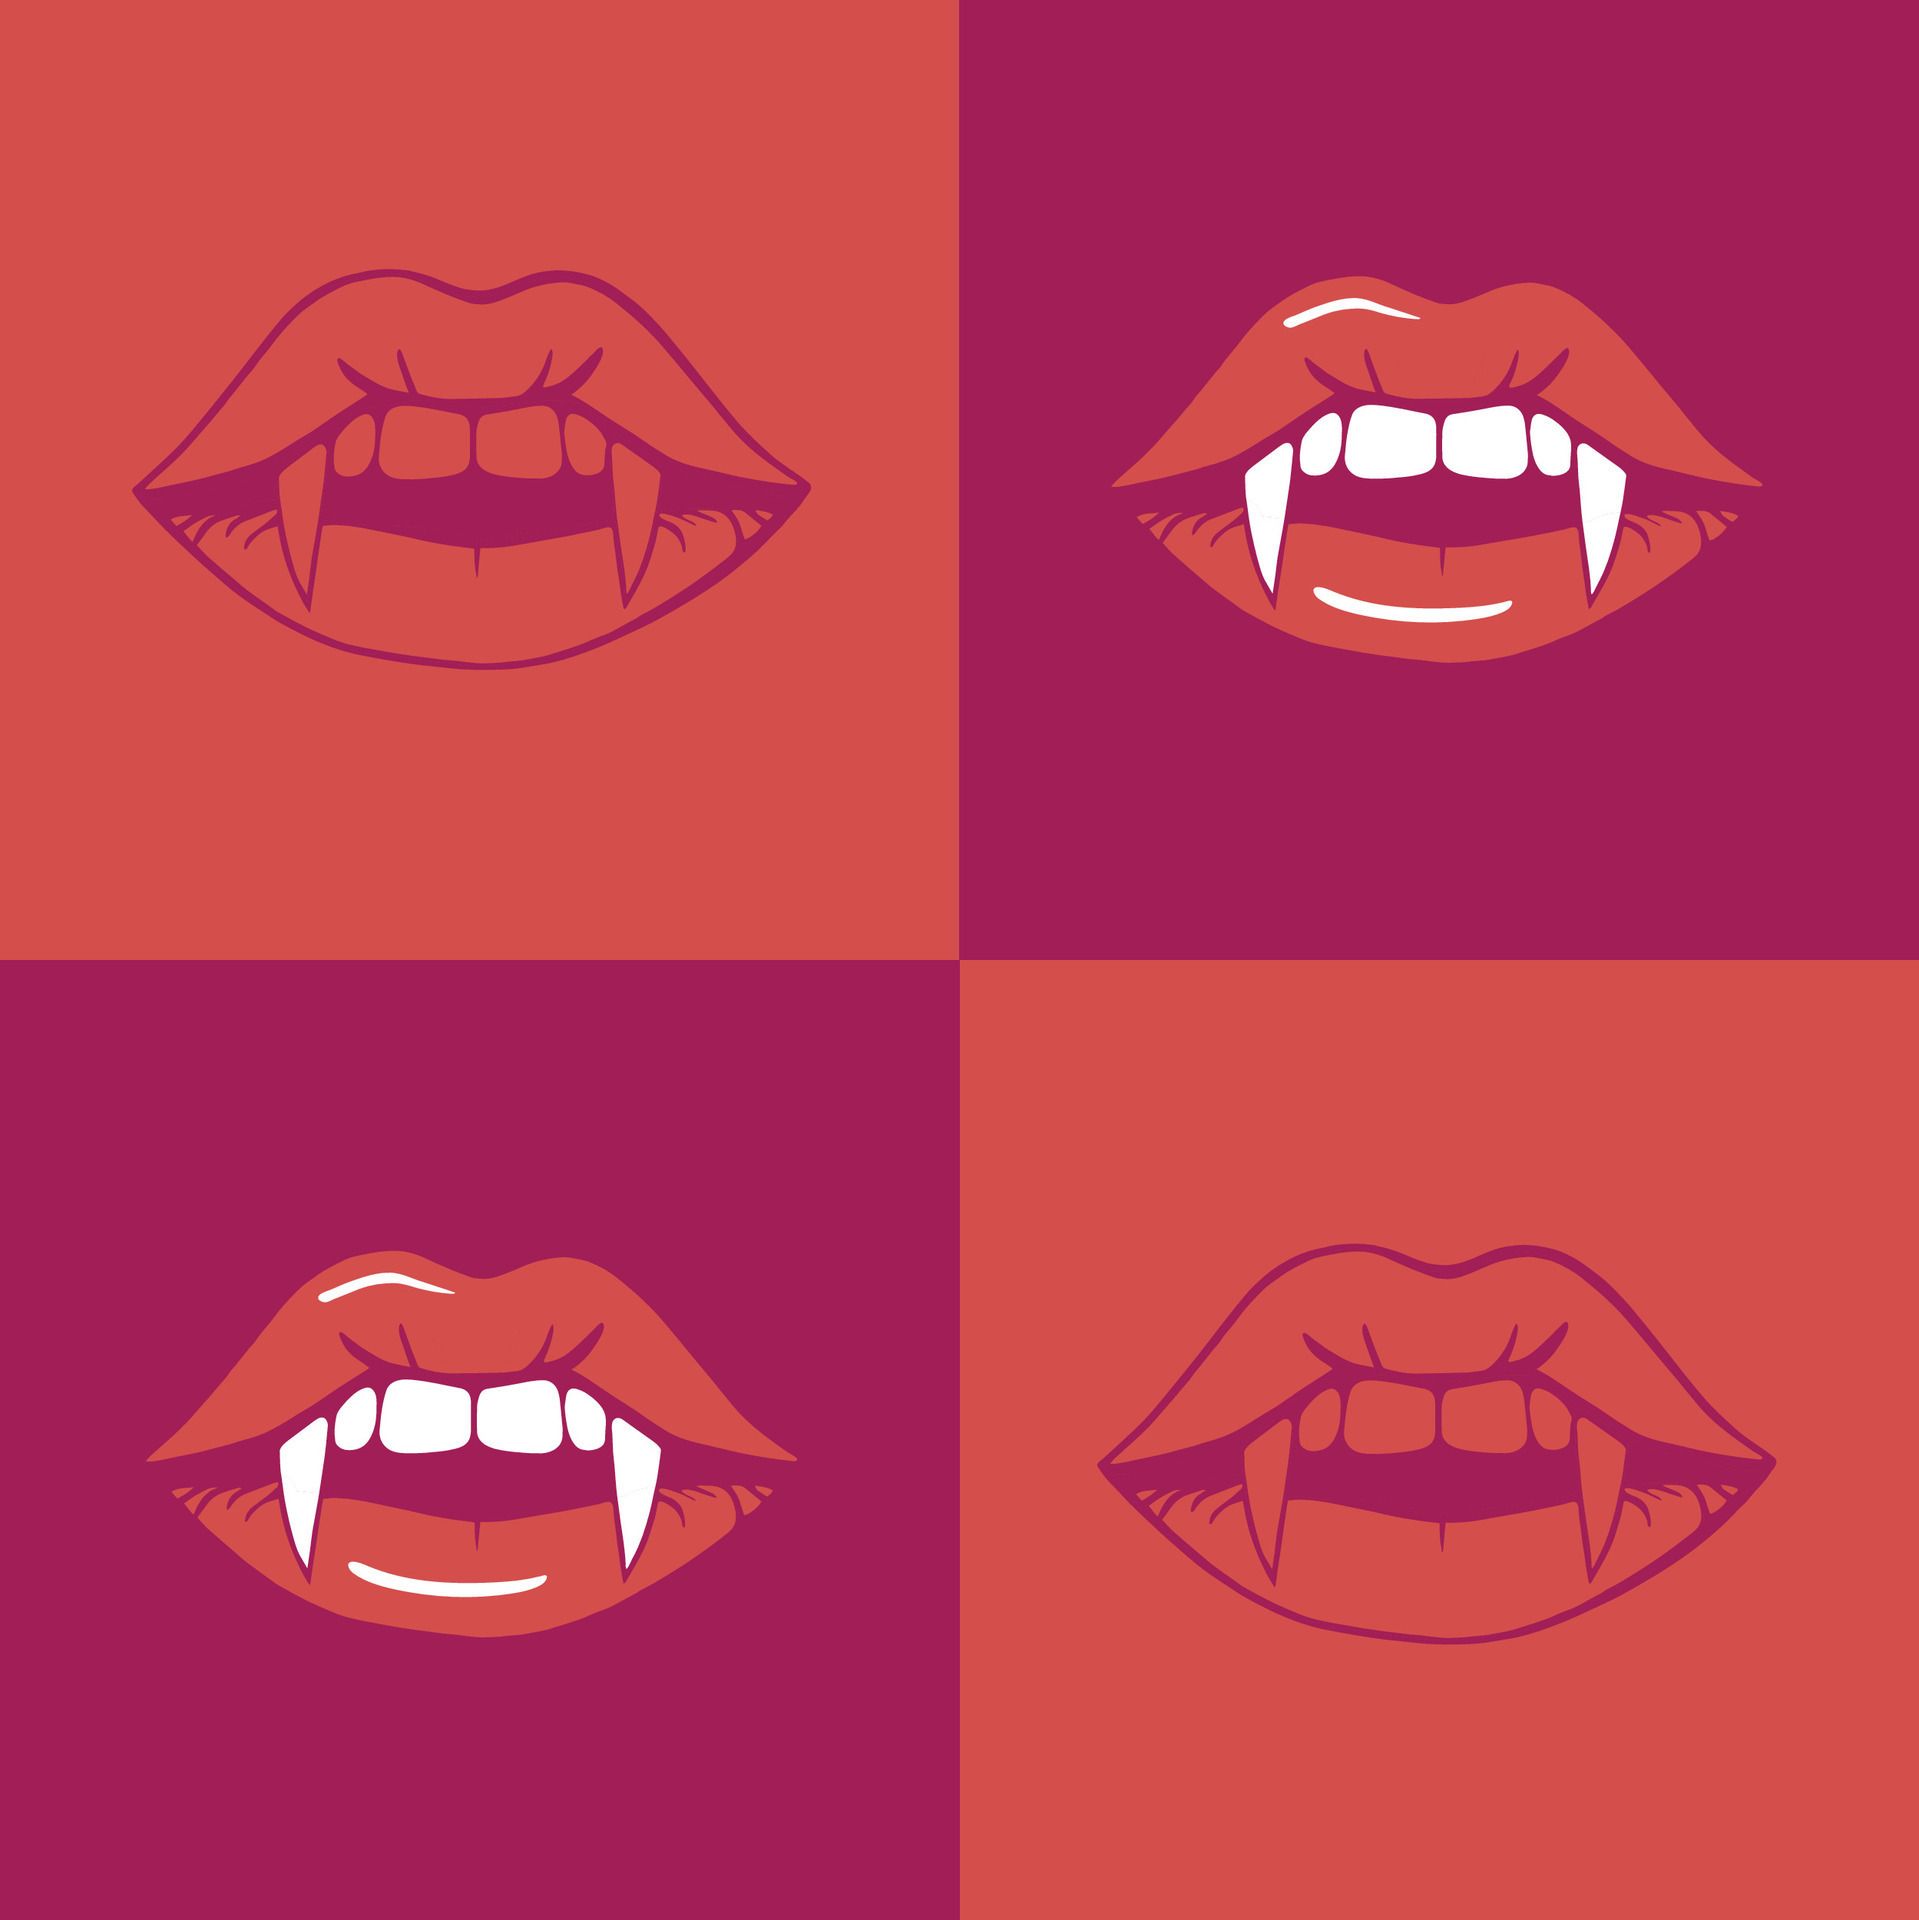 Four mouths with different amounts of fangs showing. - Lips, vampire